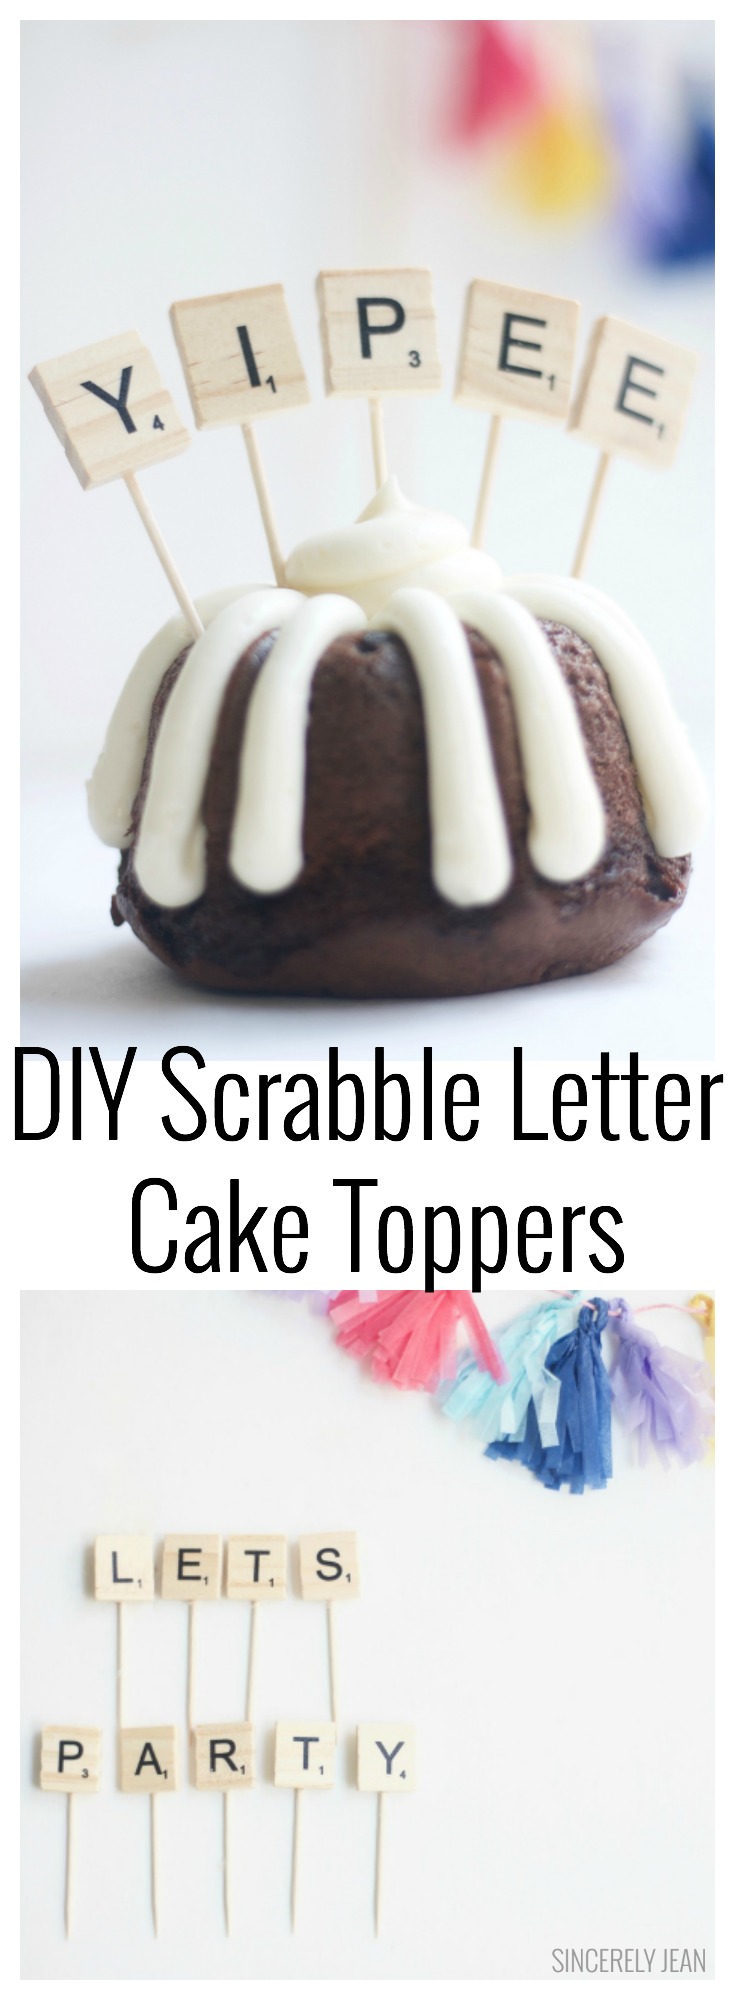 DIY Scrabble Letter Cake Toppers Birthday rustic party cake easy cheap